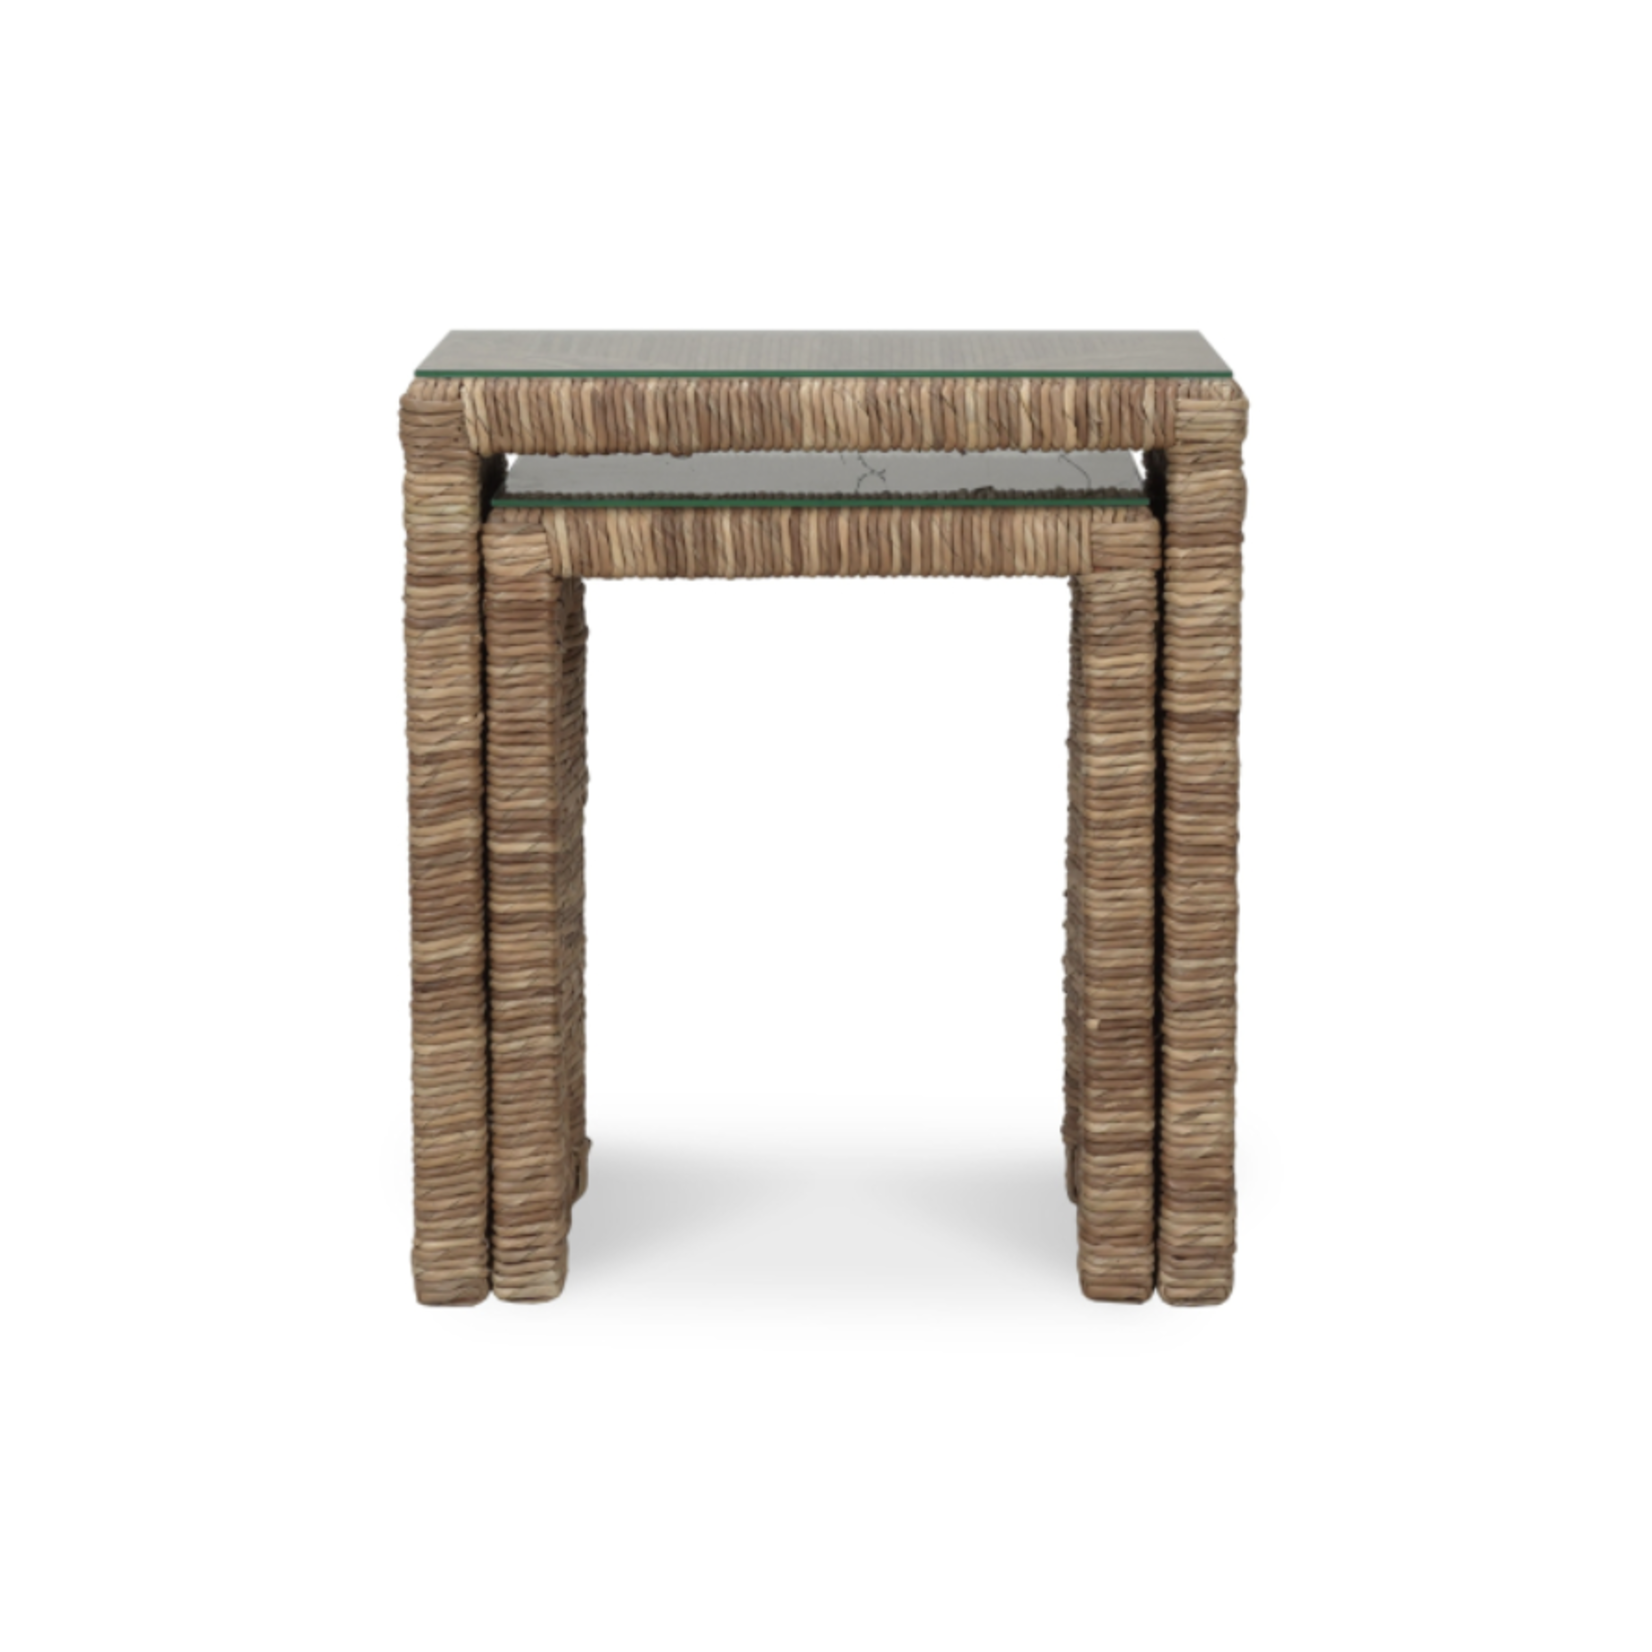 Outside The Box 24x16x27 Set Of 2 Tuscan Rush Nesting Tables With Glass